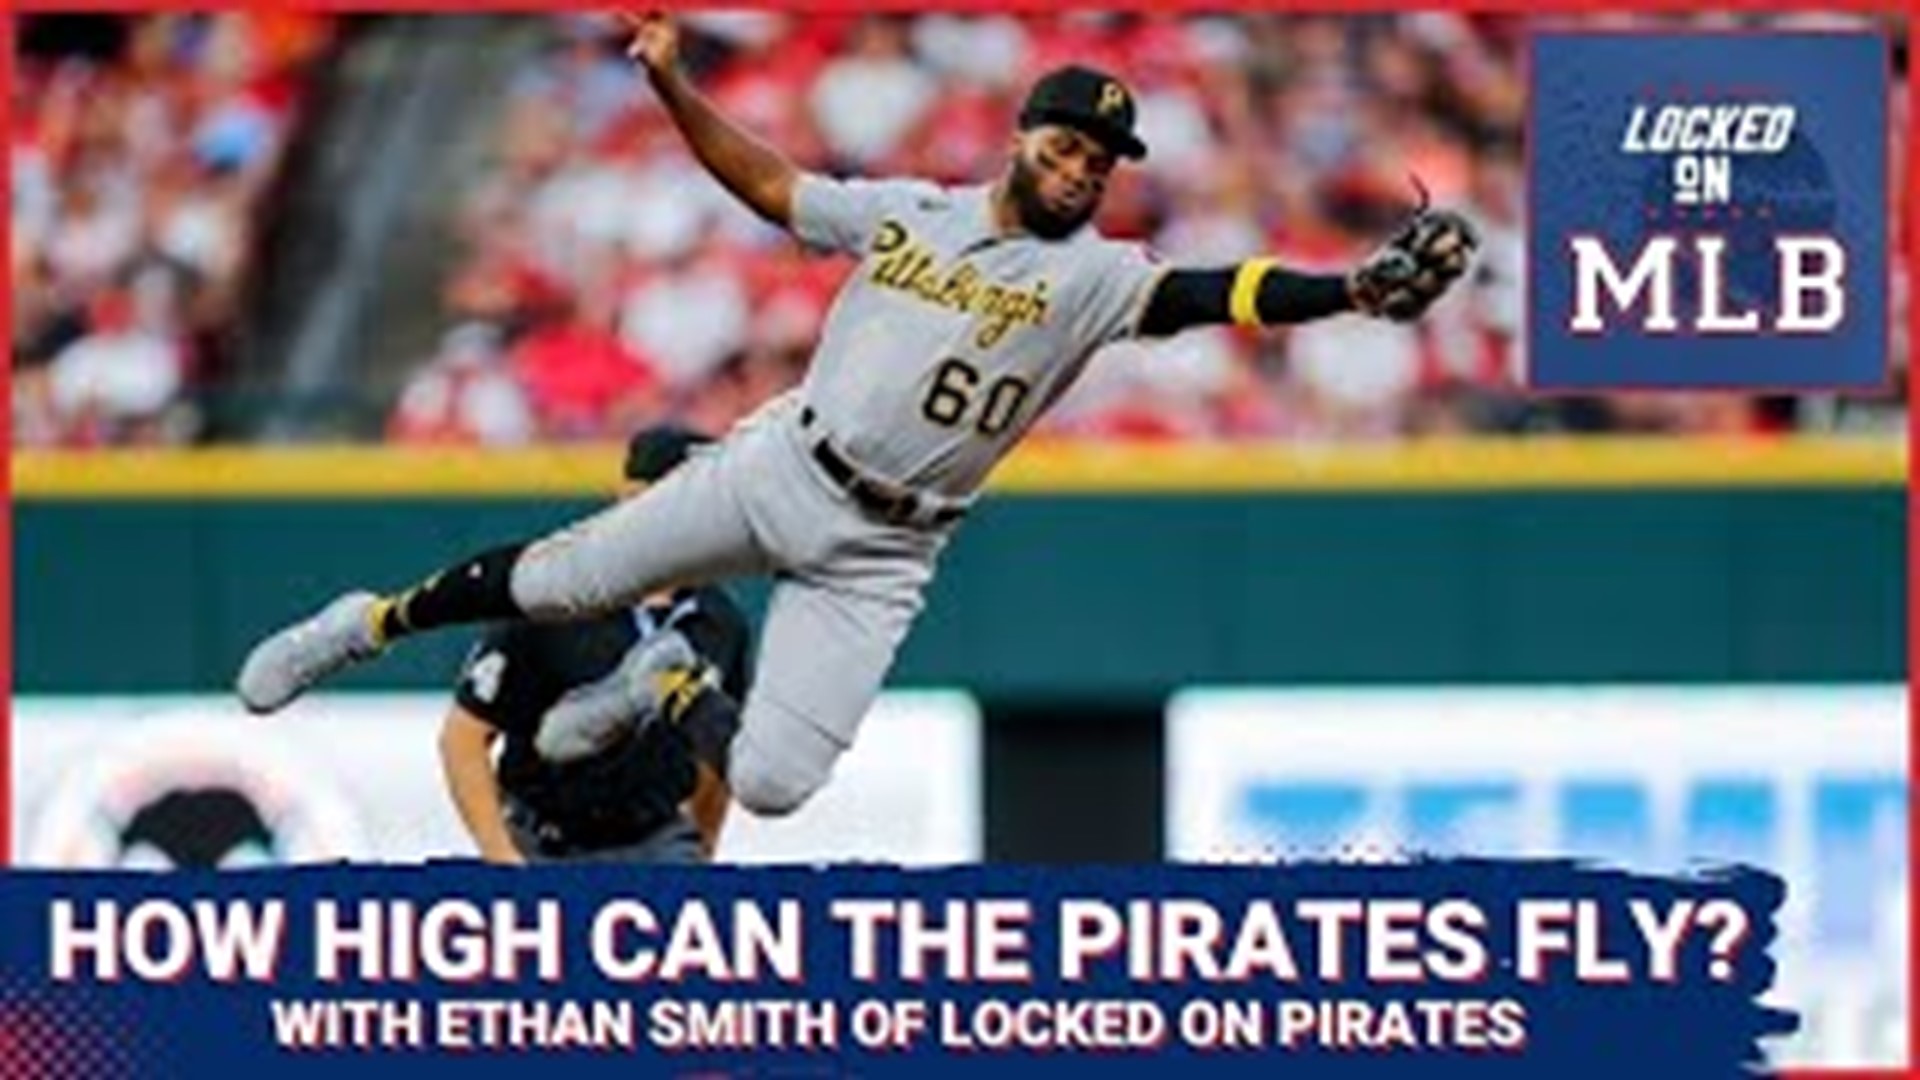 The Pirates are still looking for their first pennant since 1979. And with a cast of talented young players who got off to a hot start in 2023.